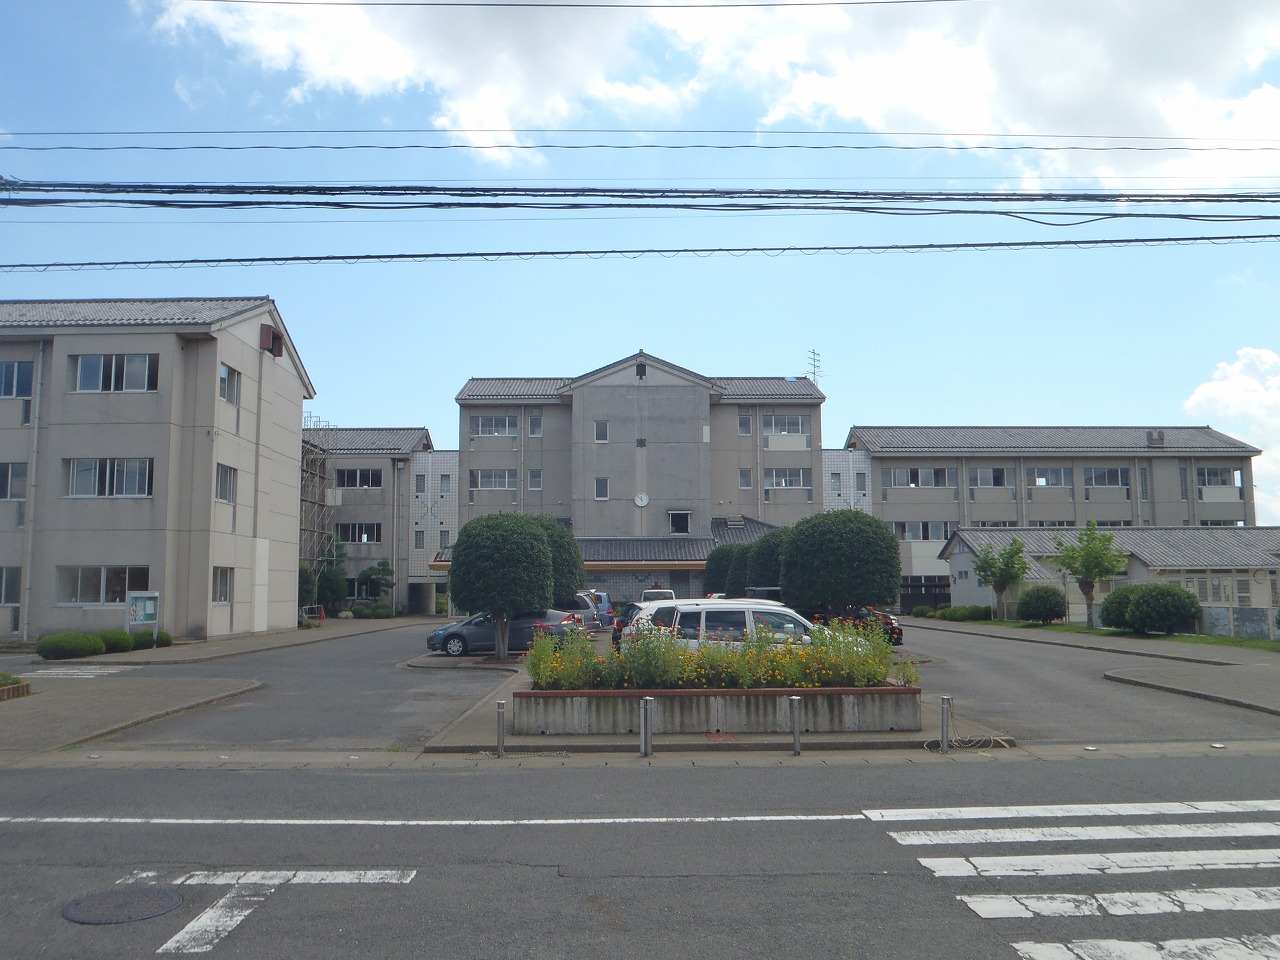 Primary school. 1150m to the outfield elementary school (elementary school)